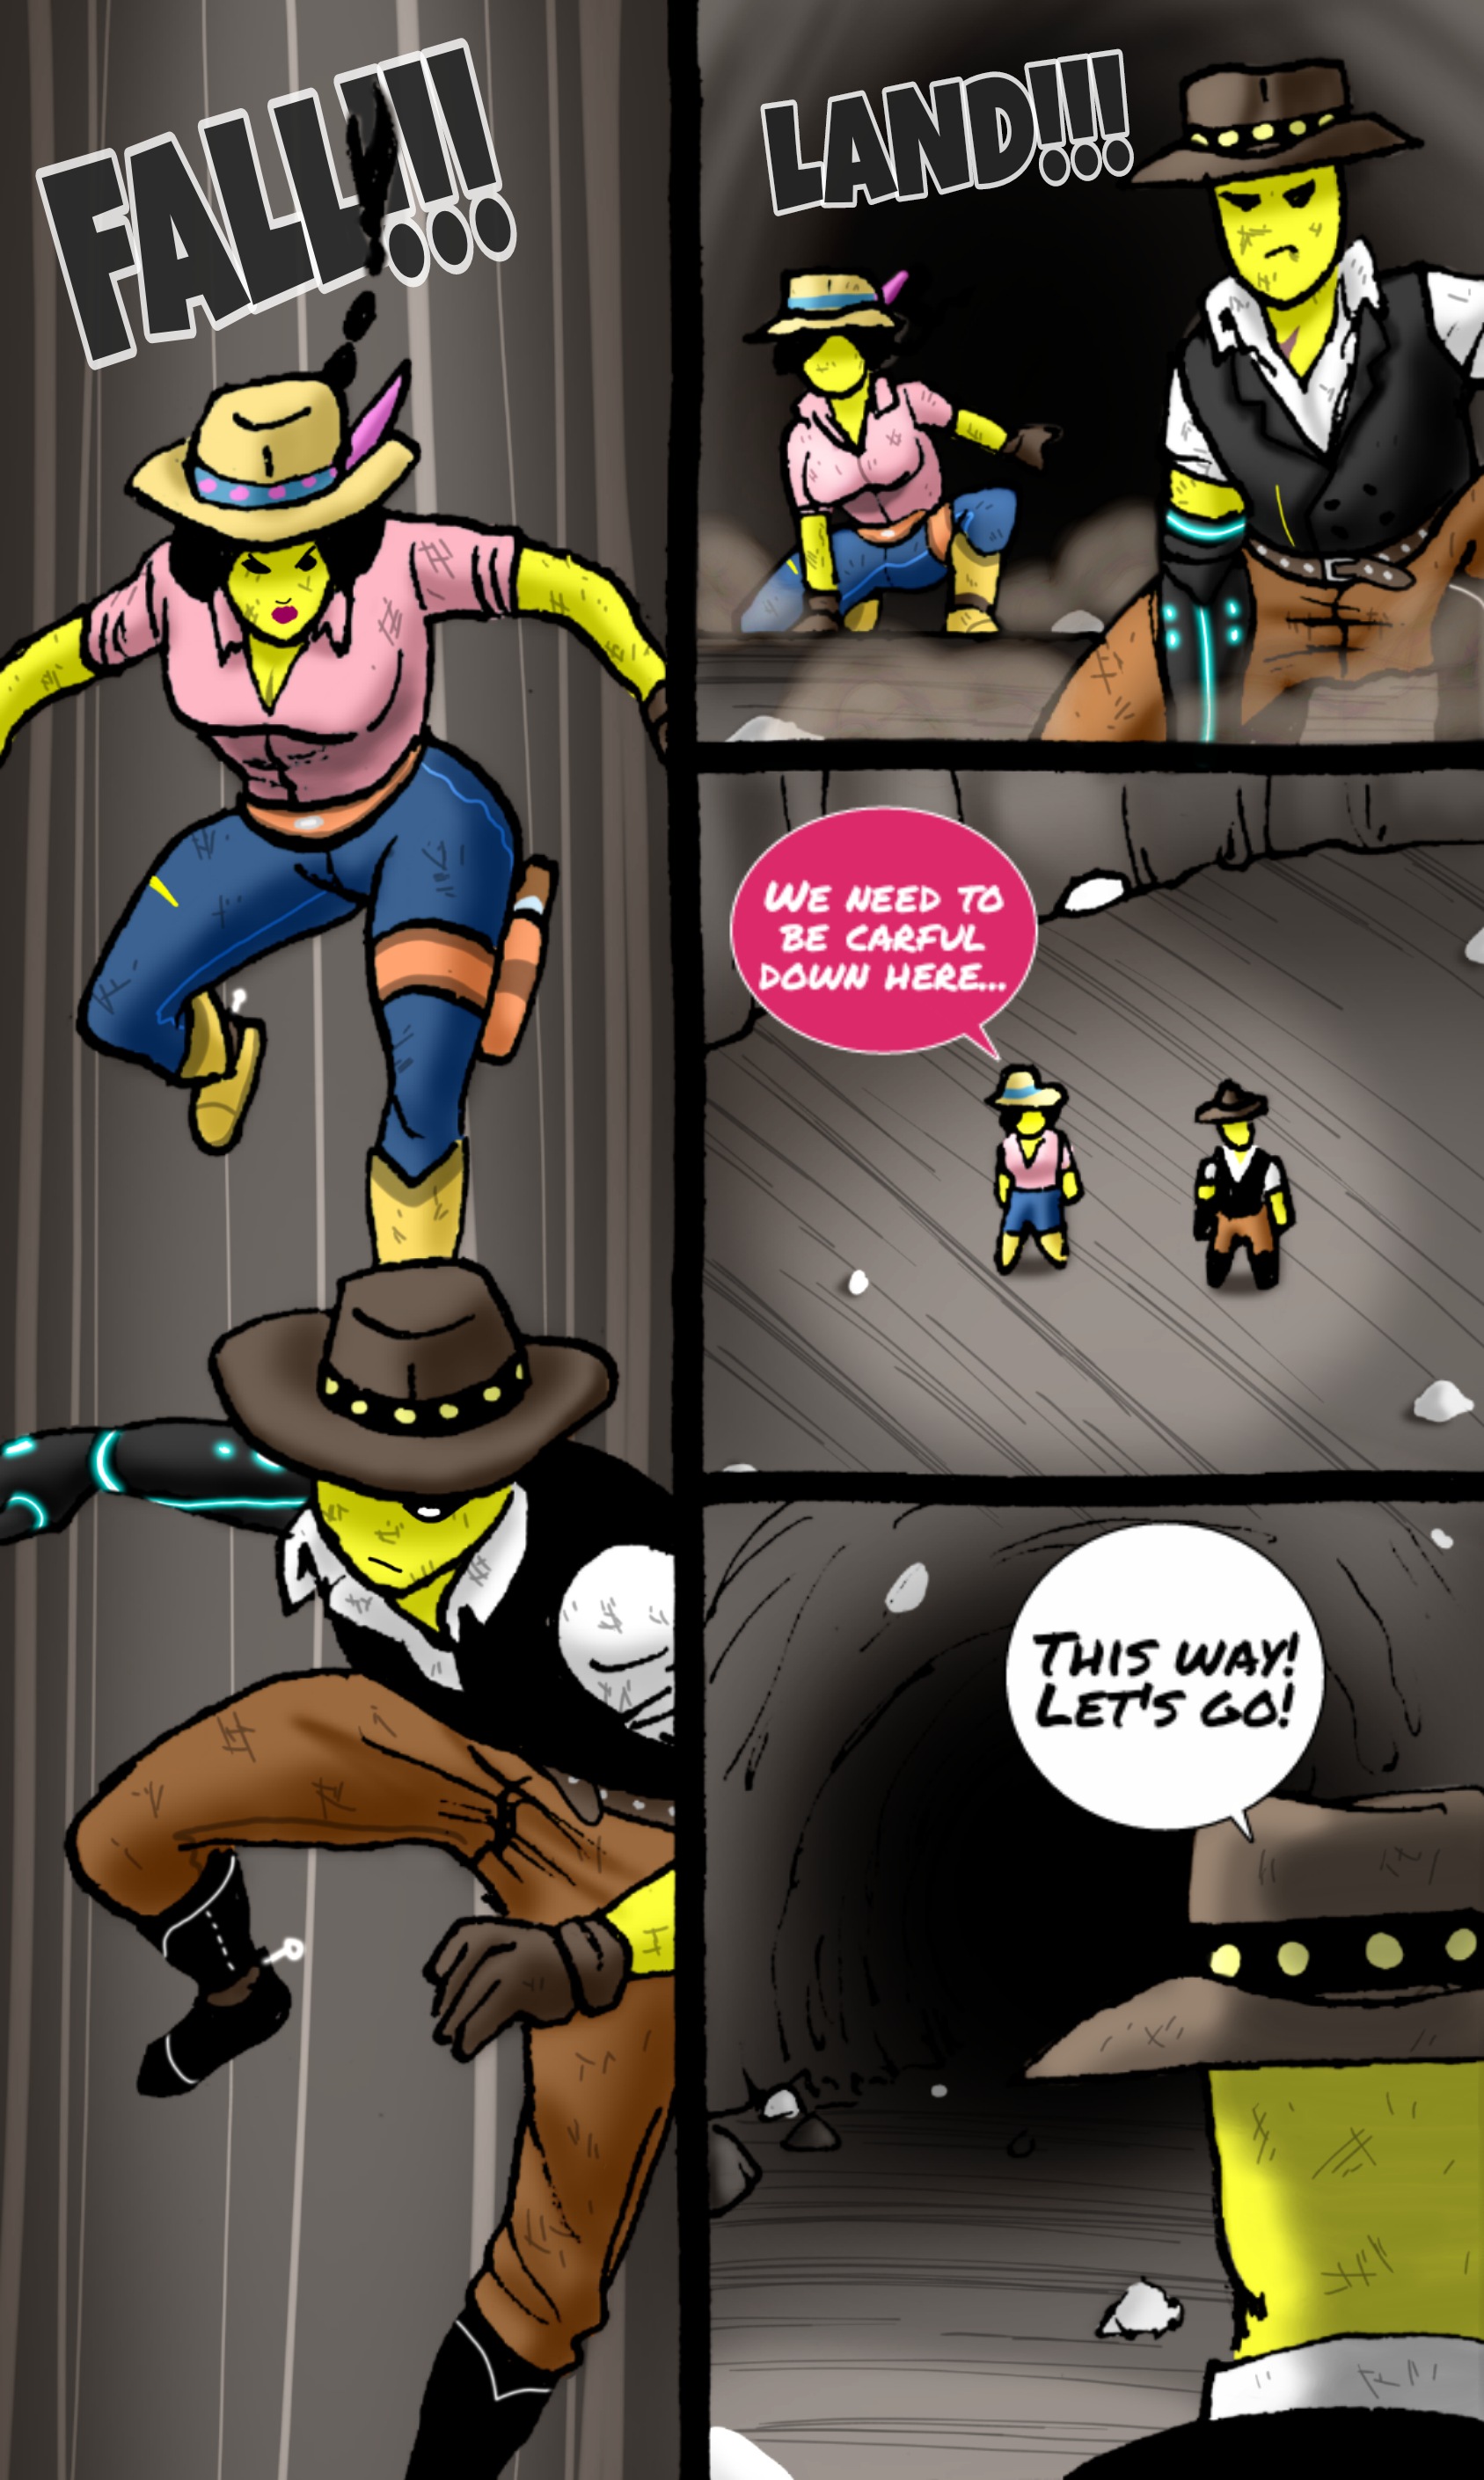 Mountie Chronicles - Page 2